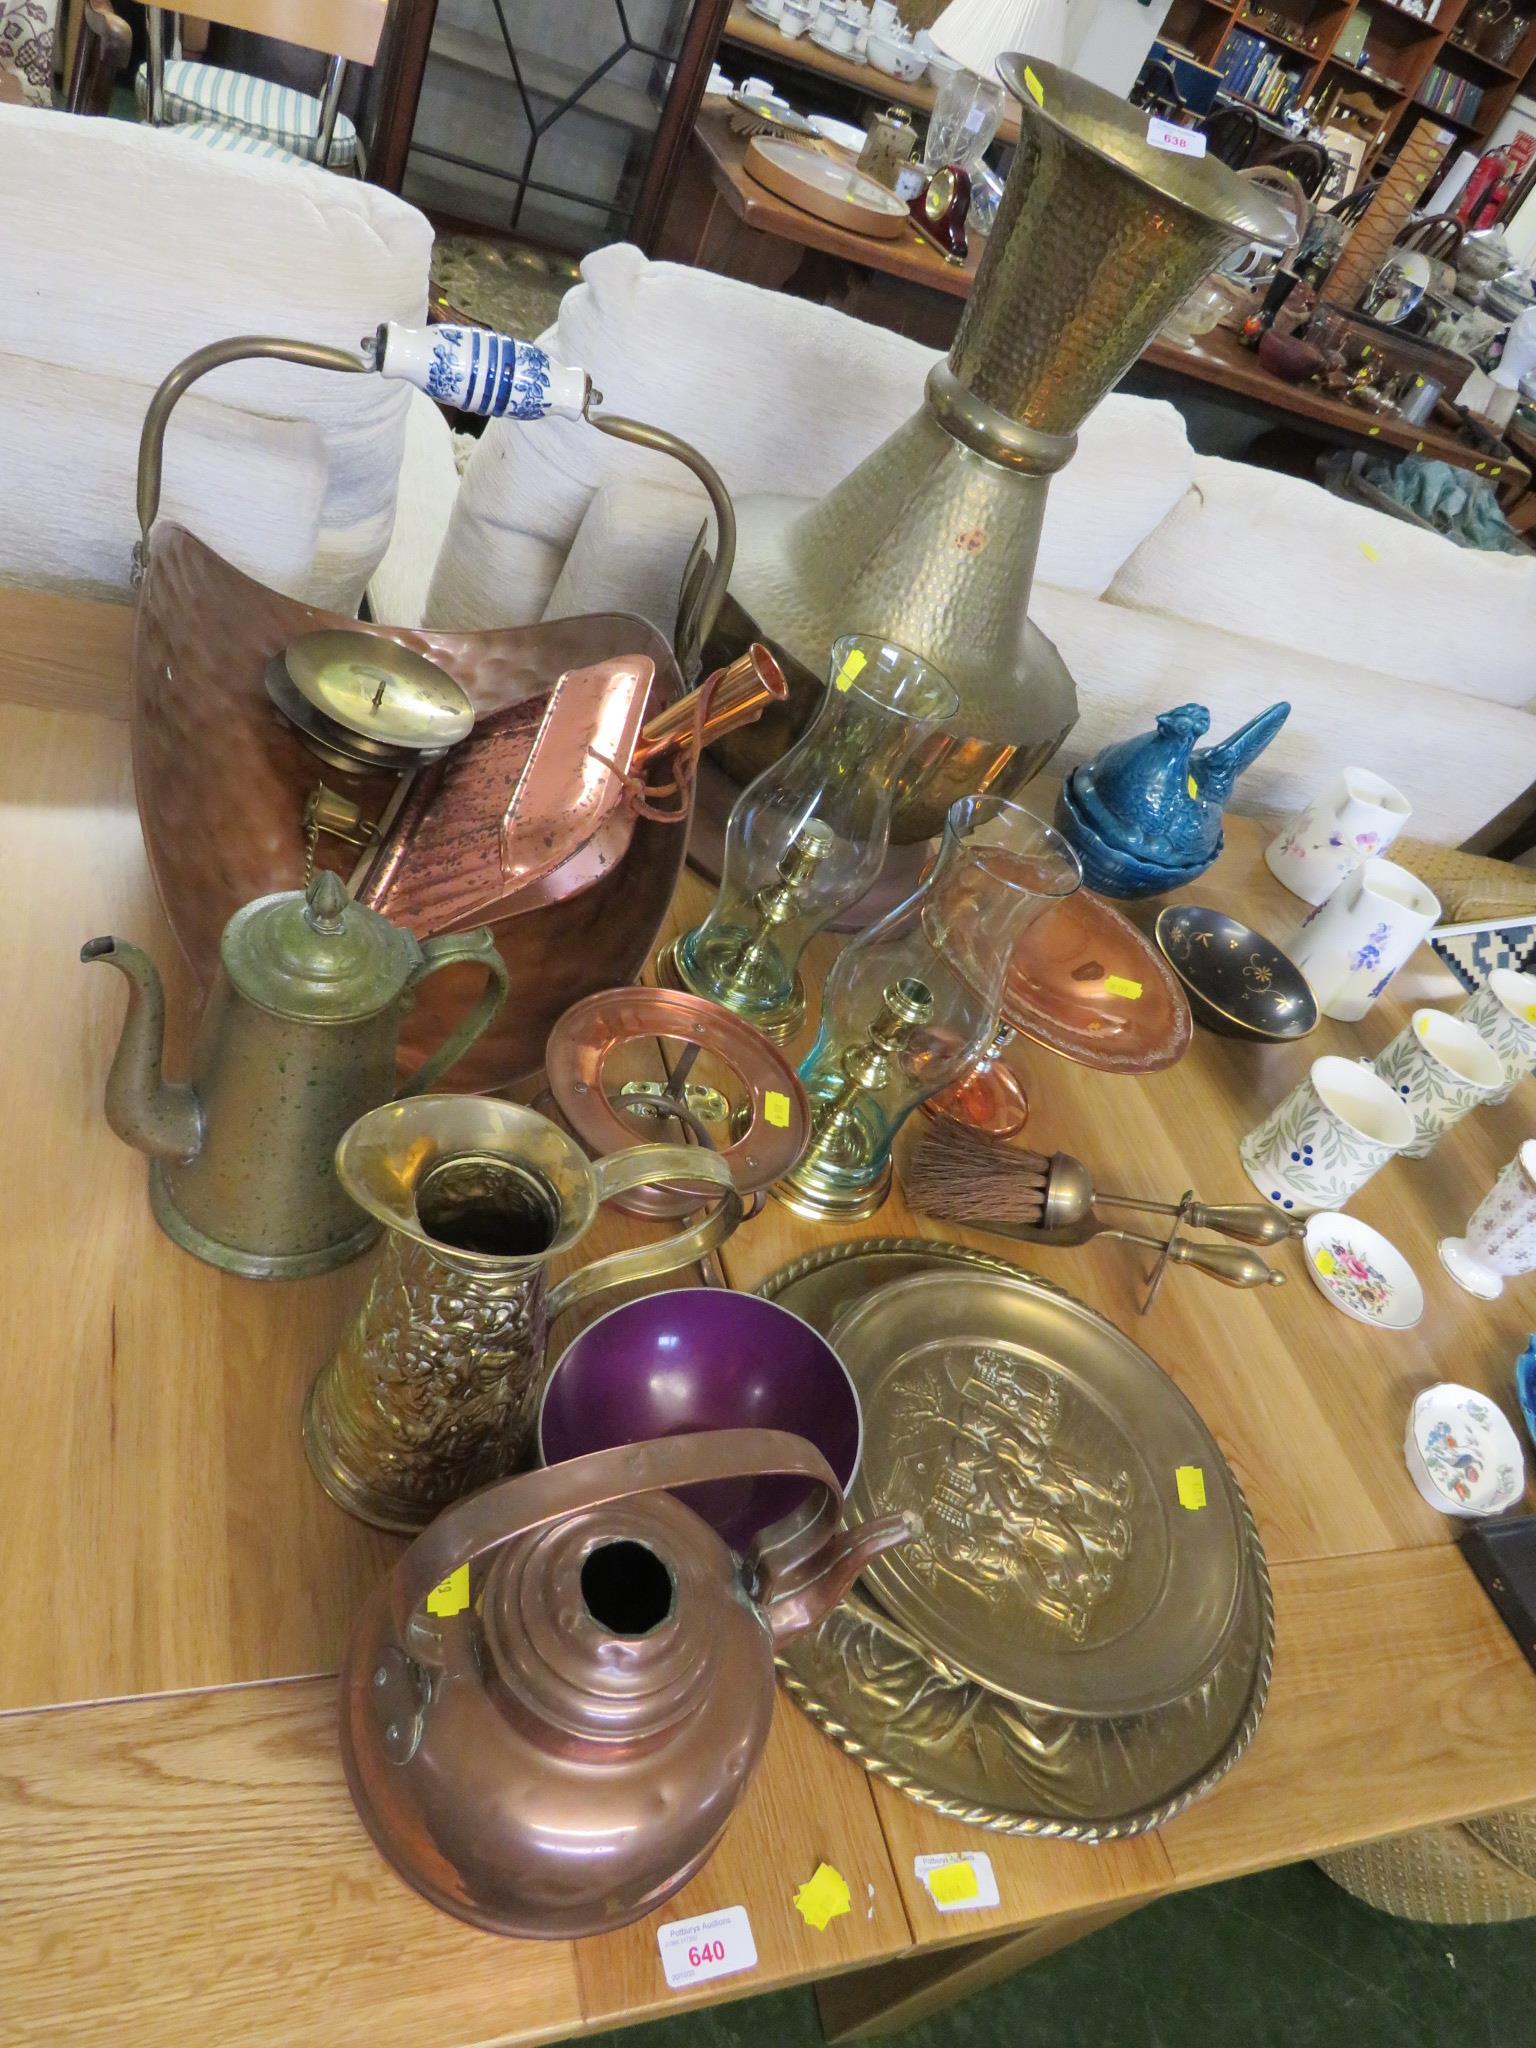 LARGE PLANISHED BRASS VASE, COPPER COAL BASKET, KETTLE, TWO CANDLE LAMPS AND OTHER METALWARE